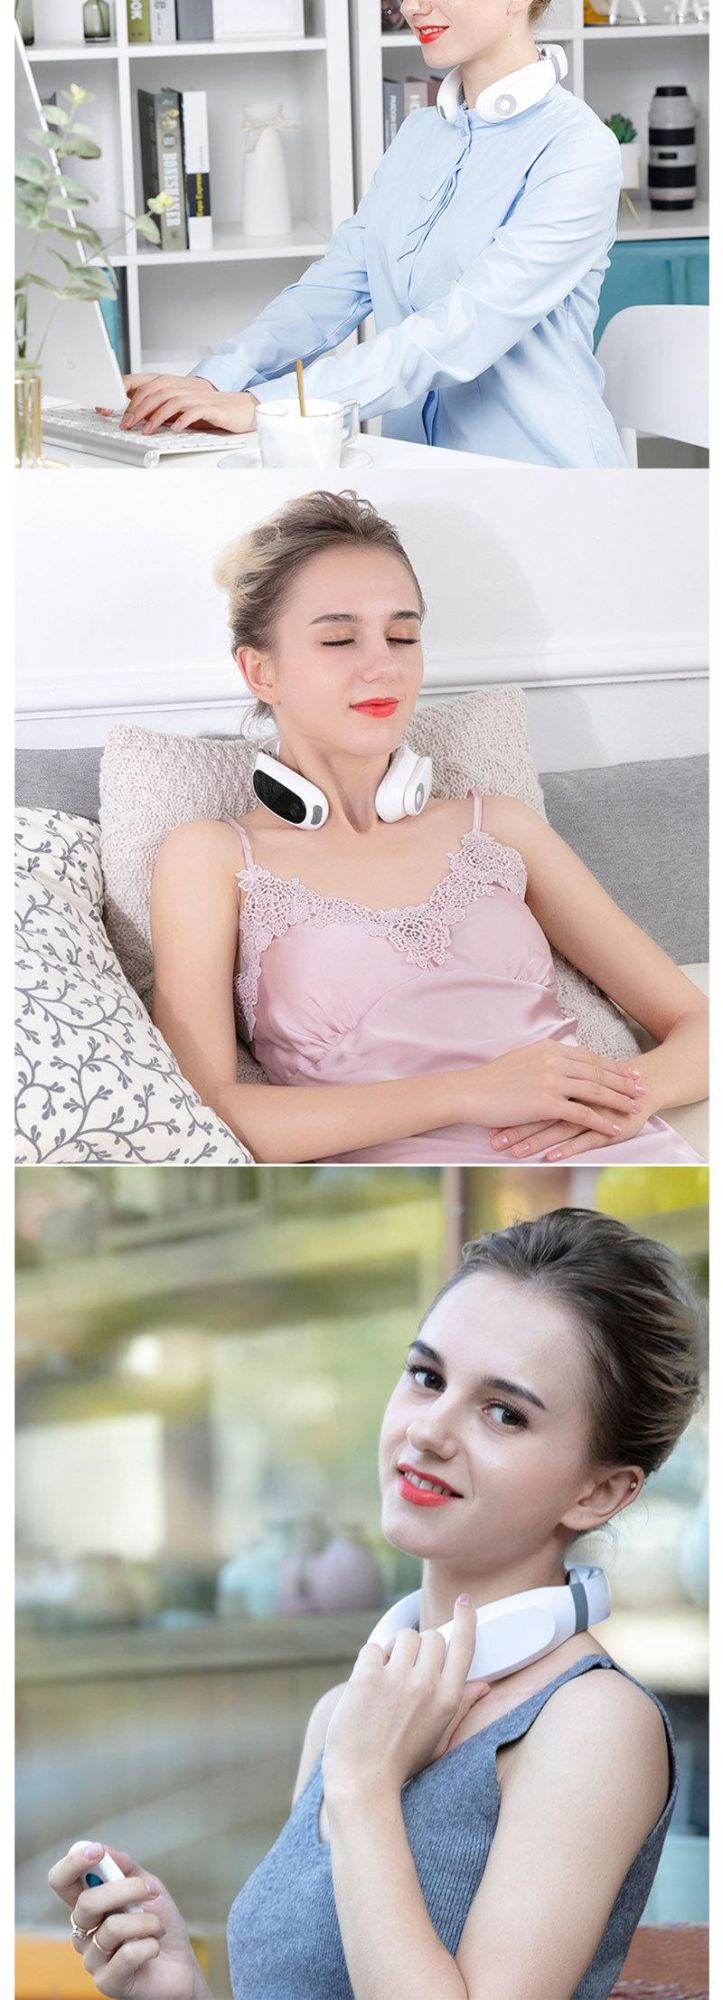 Lithium Battery Operated Muti-Functional U-Shaped Neck Massager with Heating, Vibration and EMS Pulse